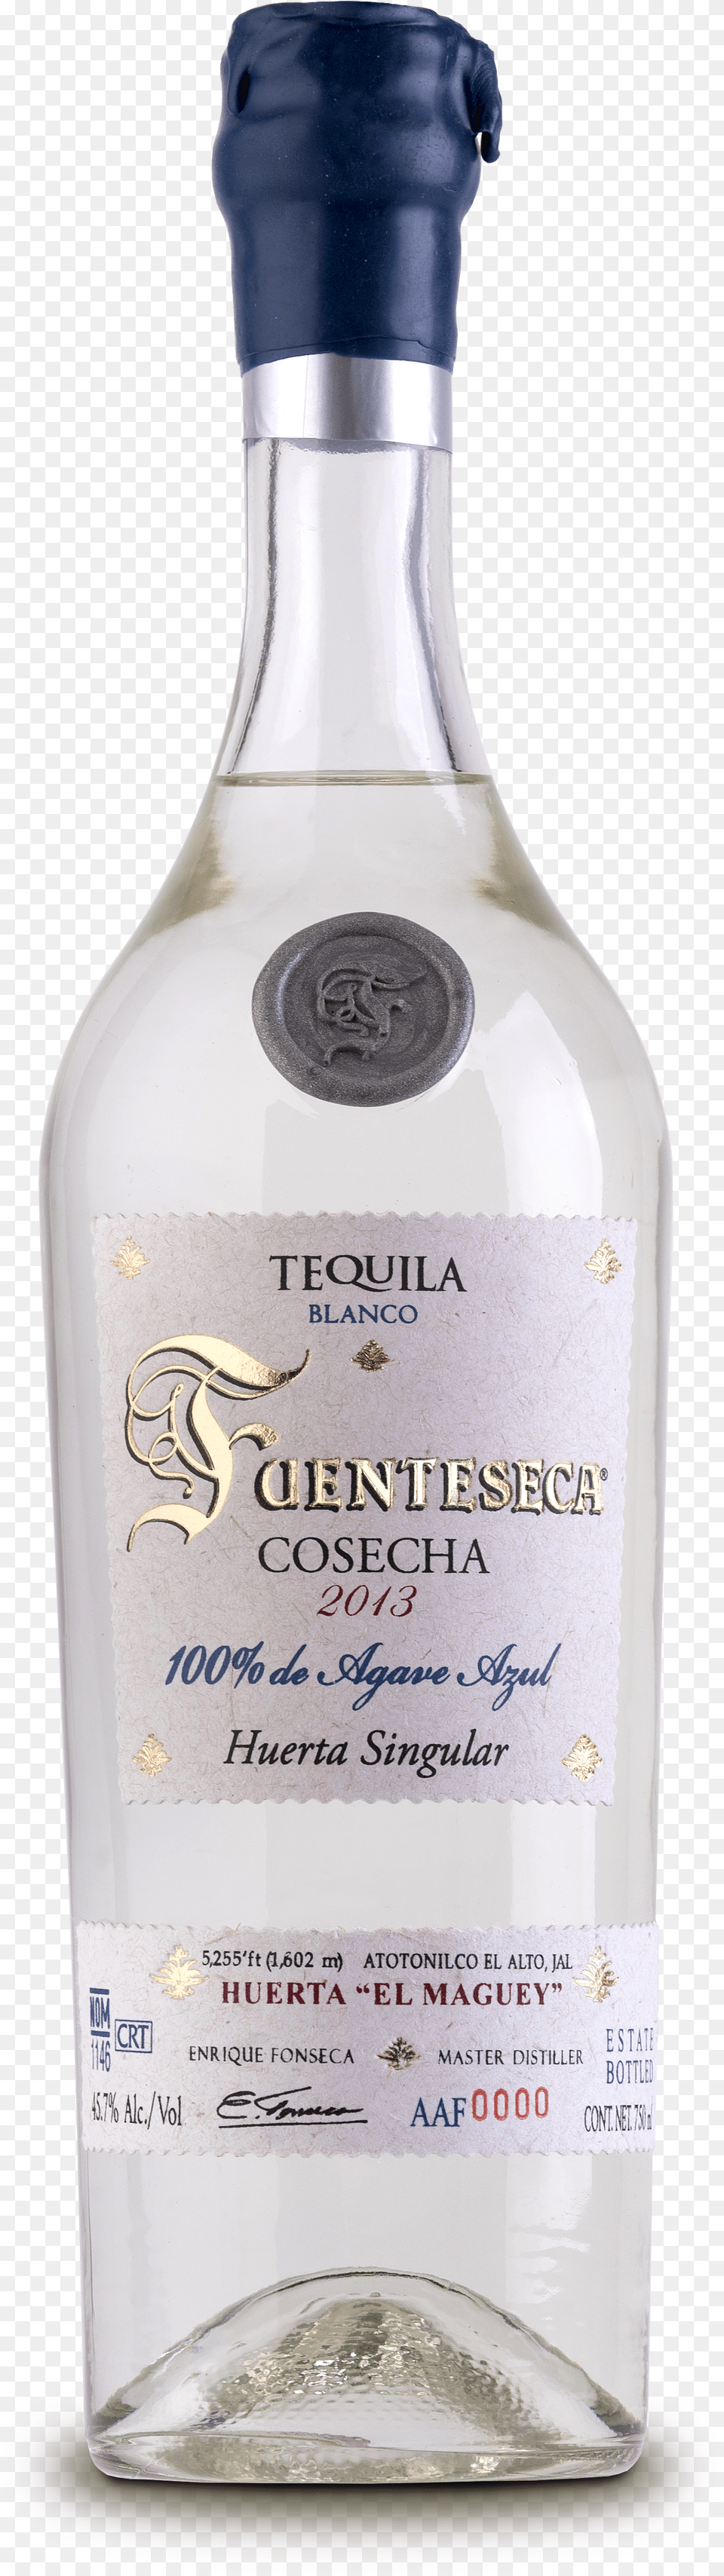 Tequila Fuenteseca Cosecha Blanco Tequila Free Transparent Png